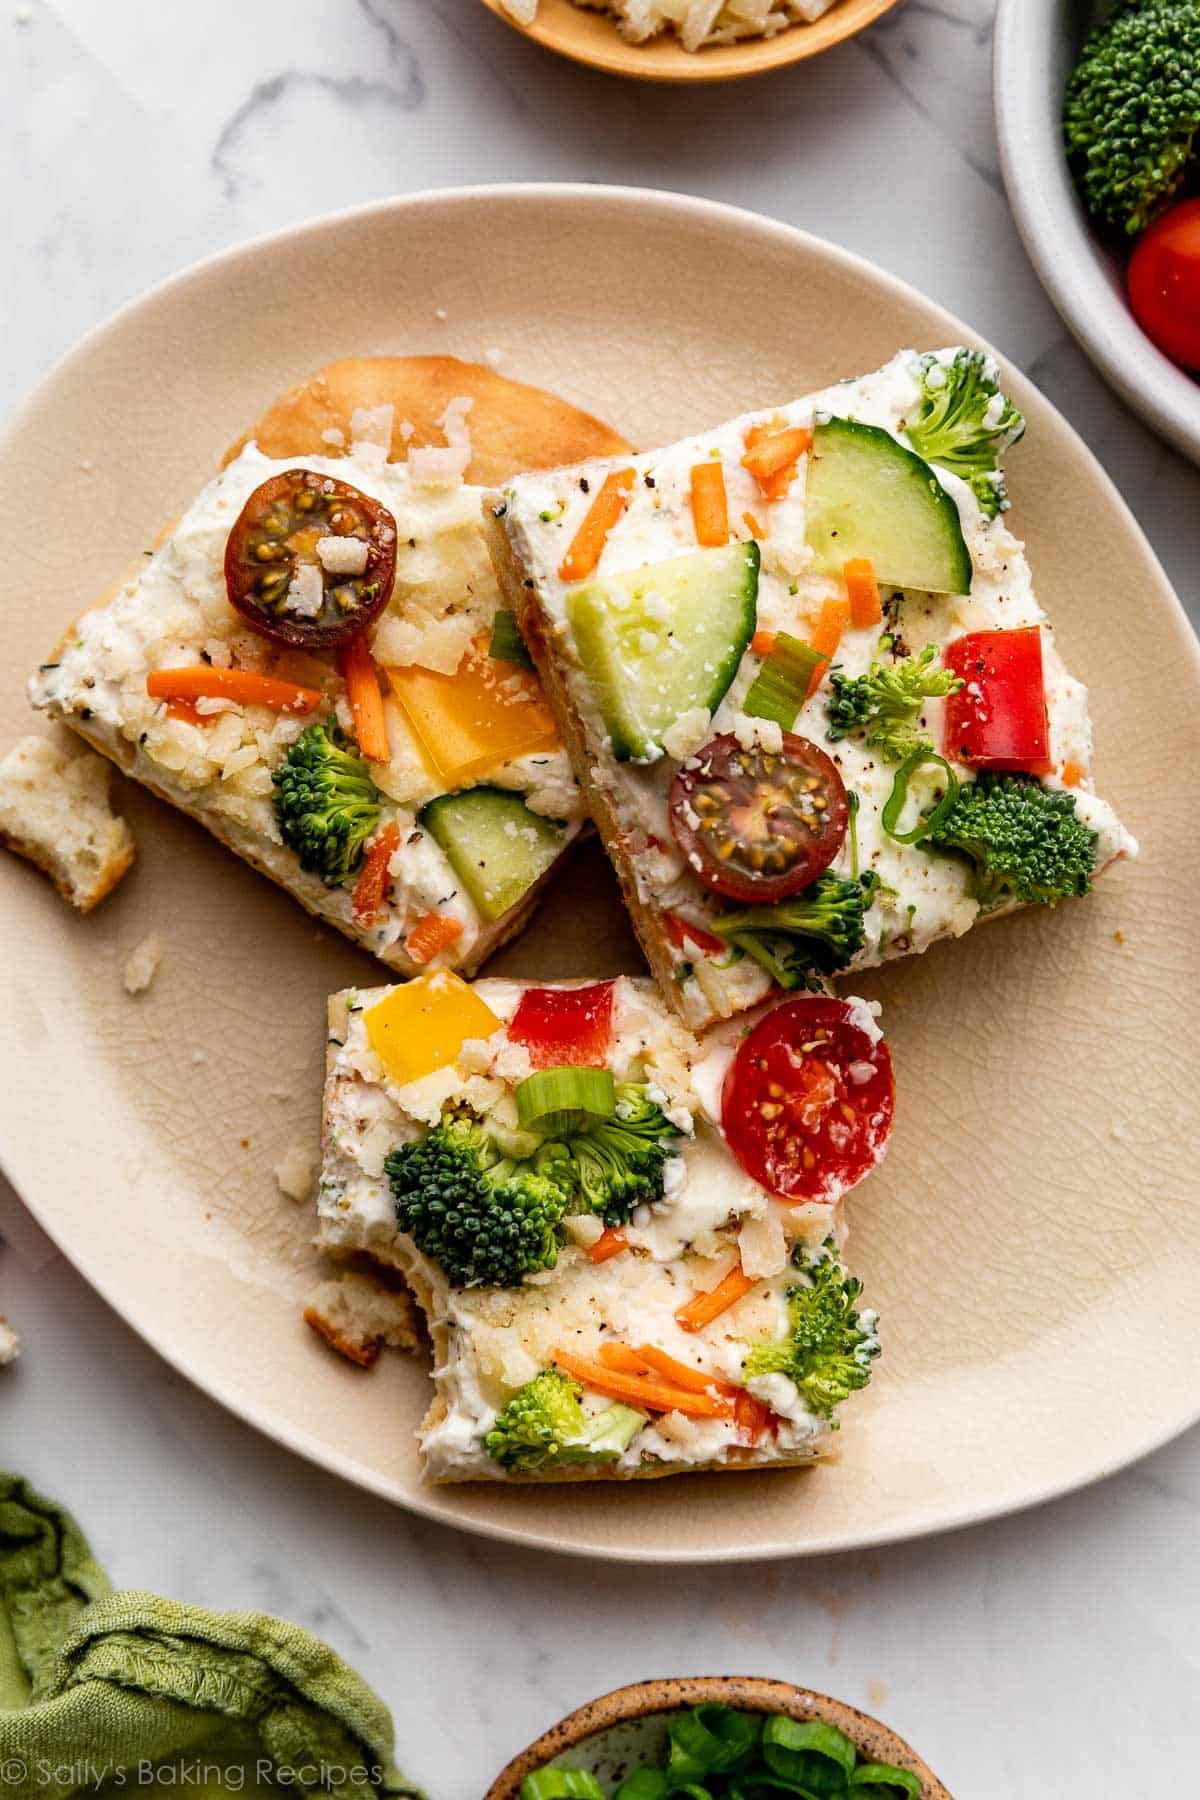 plate with 3 slices of veggie pizza on top, and one has a bite taken out.